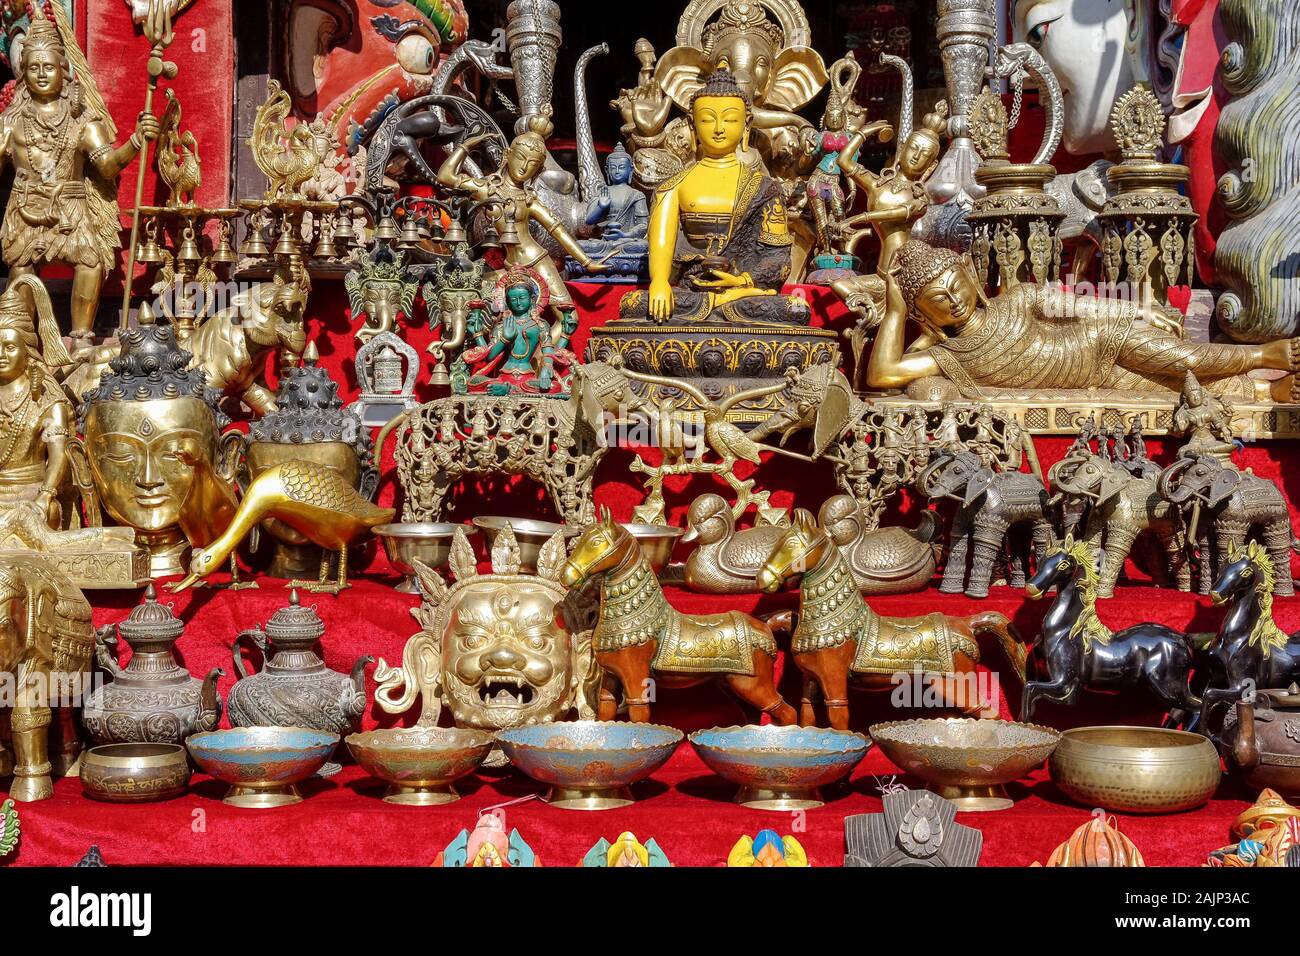 decorative brass and metal figurines and statuettes on display in Nepal market Stock Photo